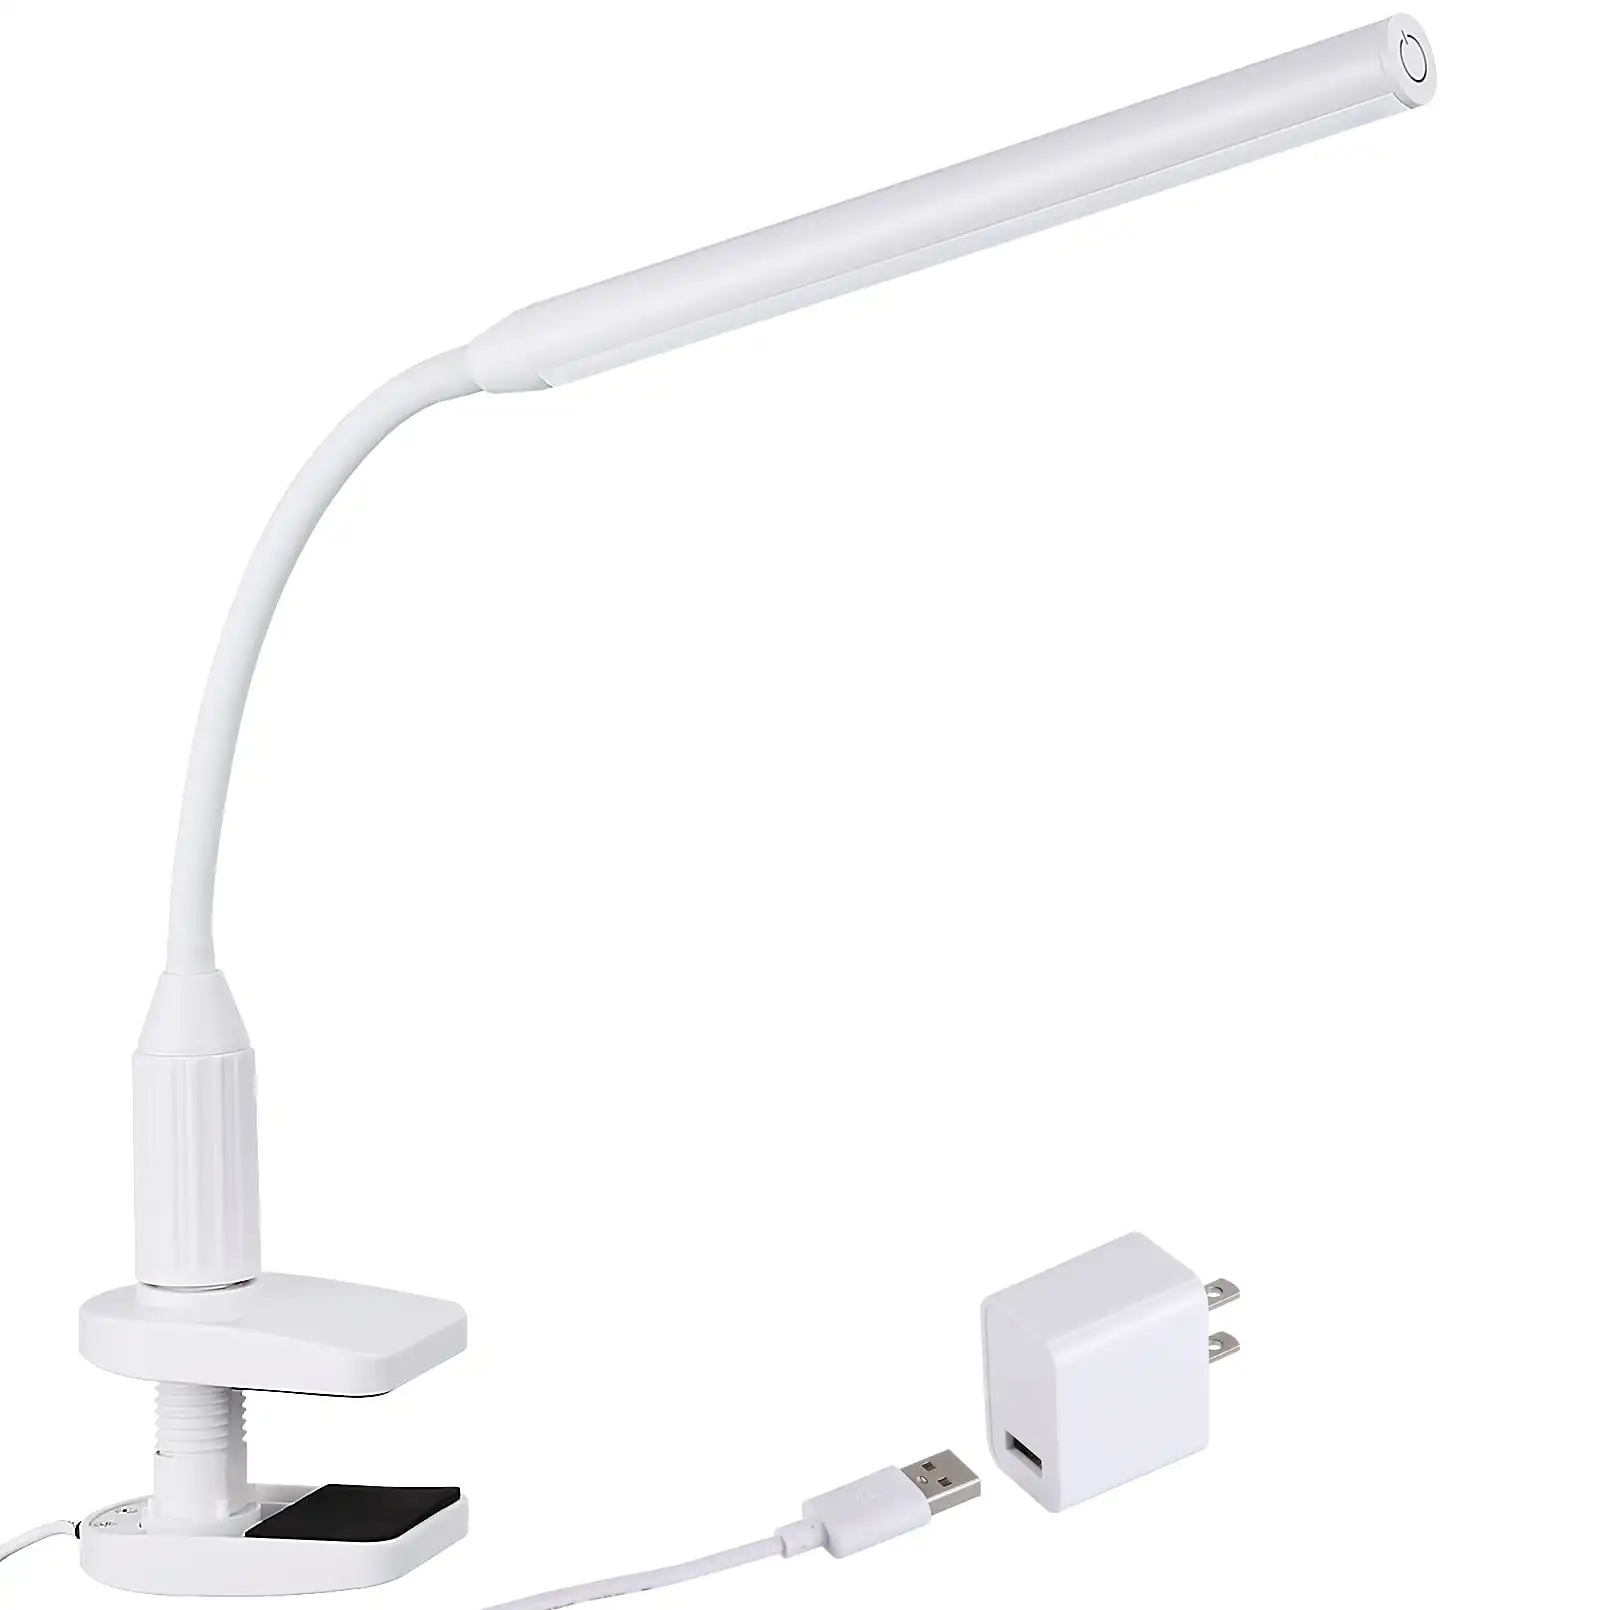 

5W Dimmable Clamp Desk Lamp, 26 LEDs Eye-Care Touch Sensitive Light with Memory Function, 4000K Cool White, USB Powered, Power A